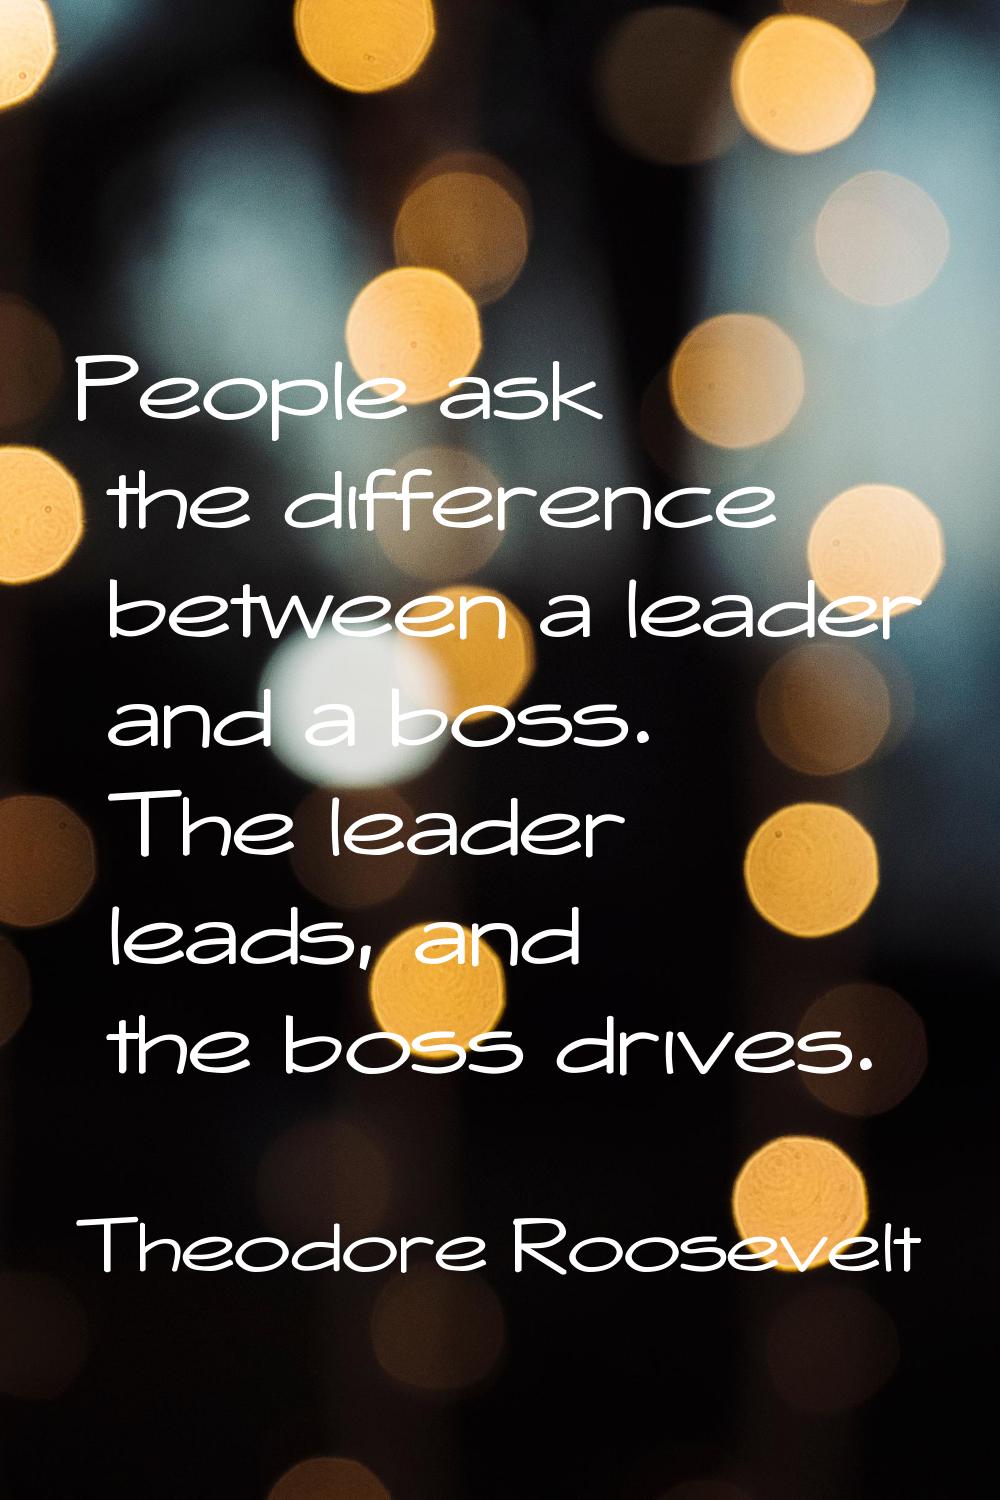 People ask the difference between a leader and a boss. The leader leads, and the boss drives.